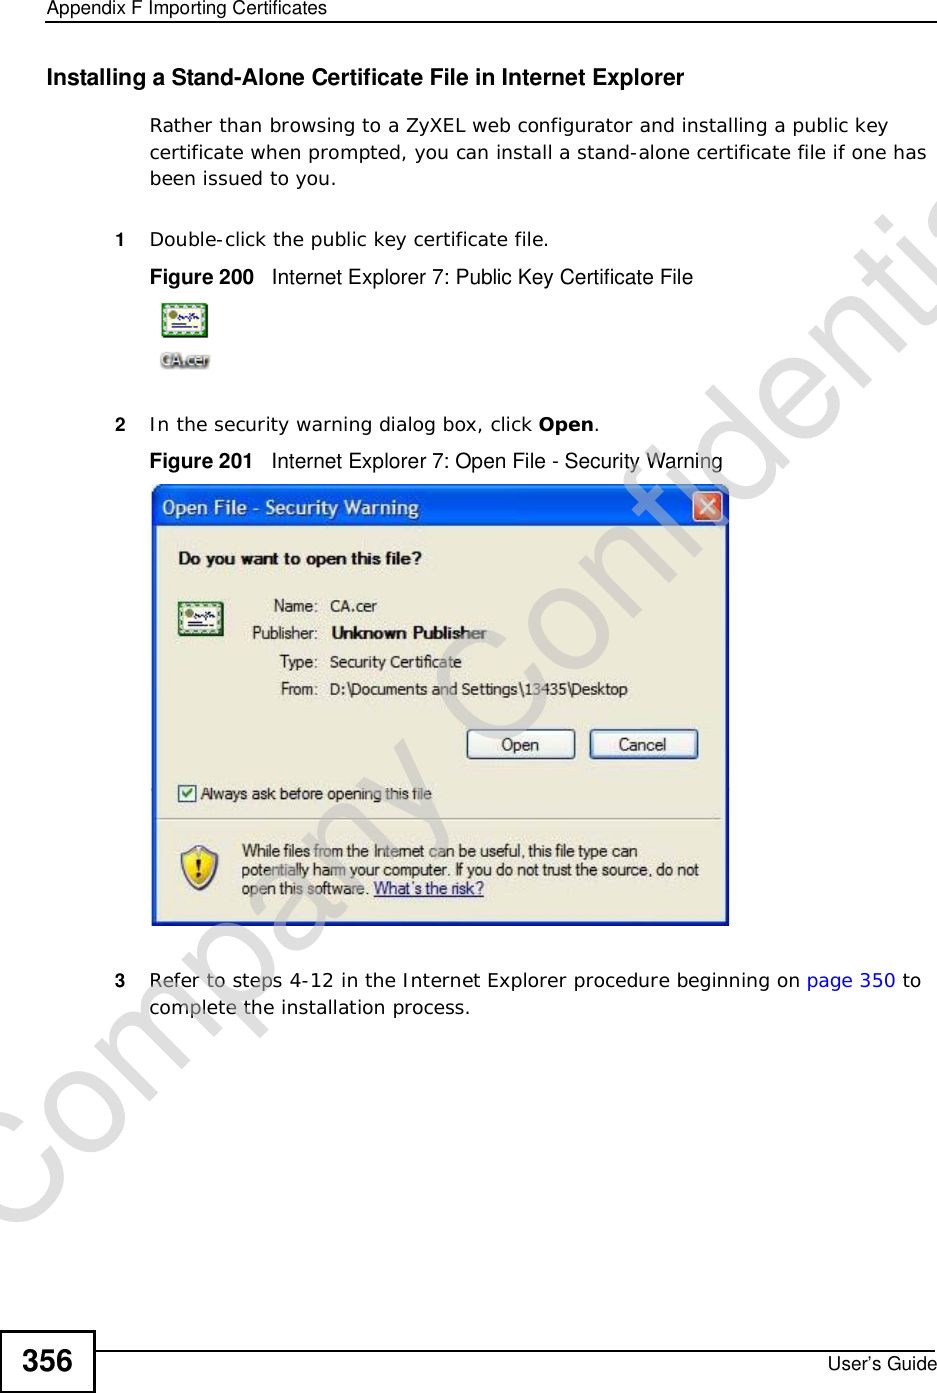 Appendix FImporting CertificatesUser’s Guide356Installing a Stand-Alone Certificate File in Internet ExplorerRather than browsing to a ZyXEL web configurator and installing a public key certificate when prompted, you can install a stand-alone certificate file if one has been issued to you.1Double-click the public key certificate file.Figure 200   Internet Explorer 7: Public Key Certificate File2In the security warning dialog box, click Open.Figure 201   Internet Explorer 7: Open File - Security Warning3Refer to steps 4-12 in the Internet Explorer procedure beginning on page350 to complete the installation process.Company Confidential